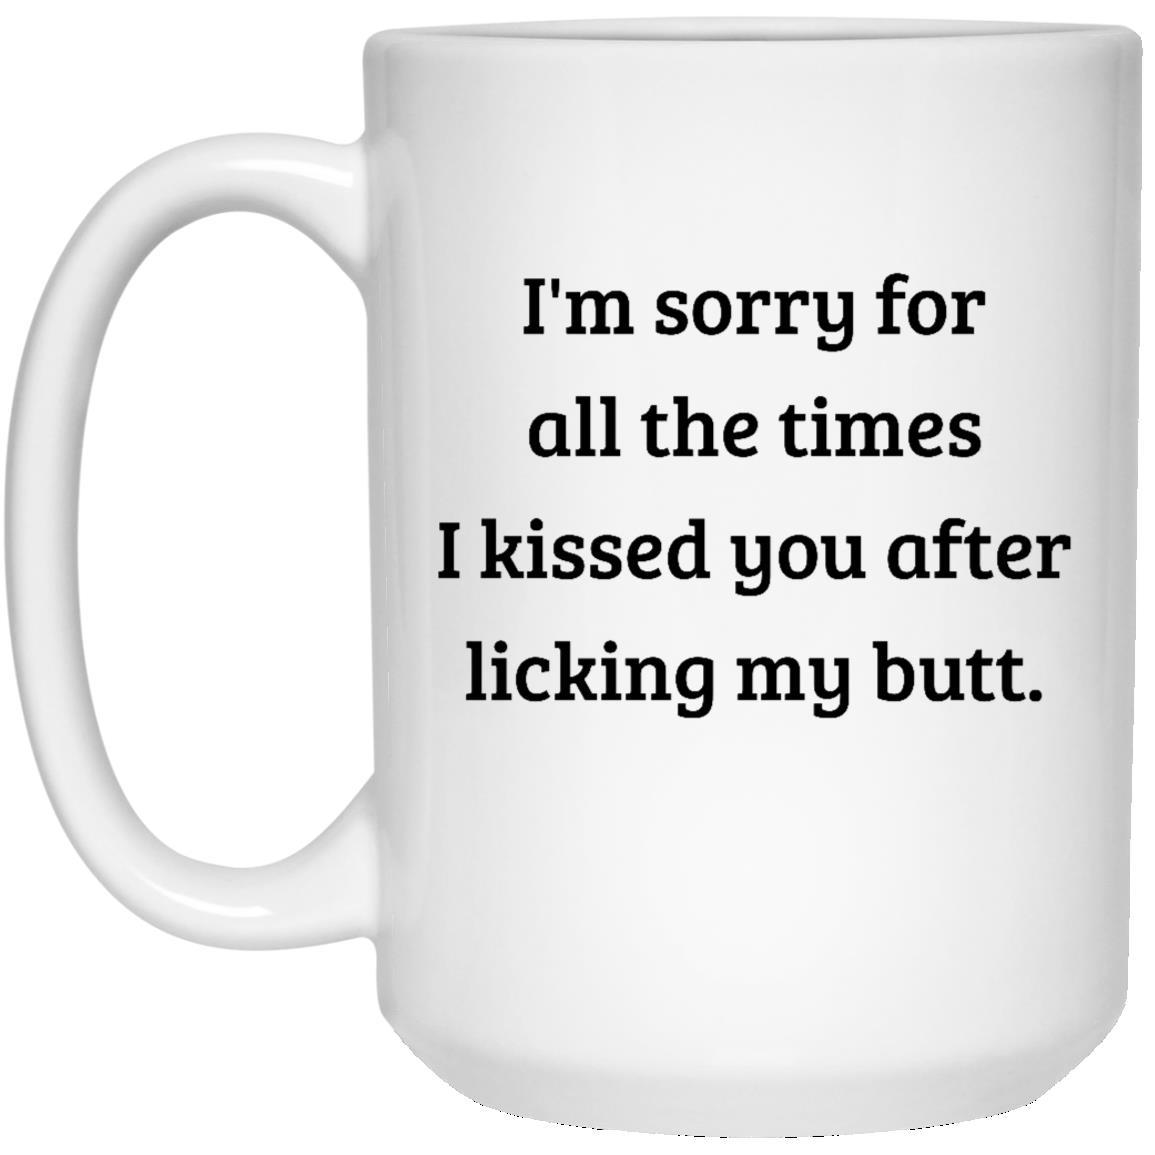 I'm Sorry For All The Times I Kissed You After Licking My Butt Mug